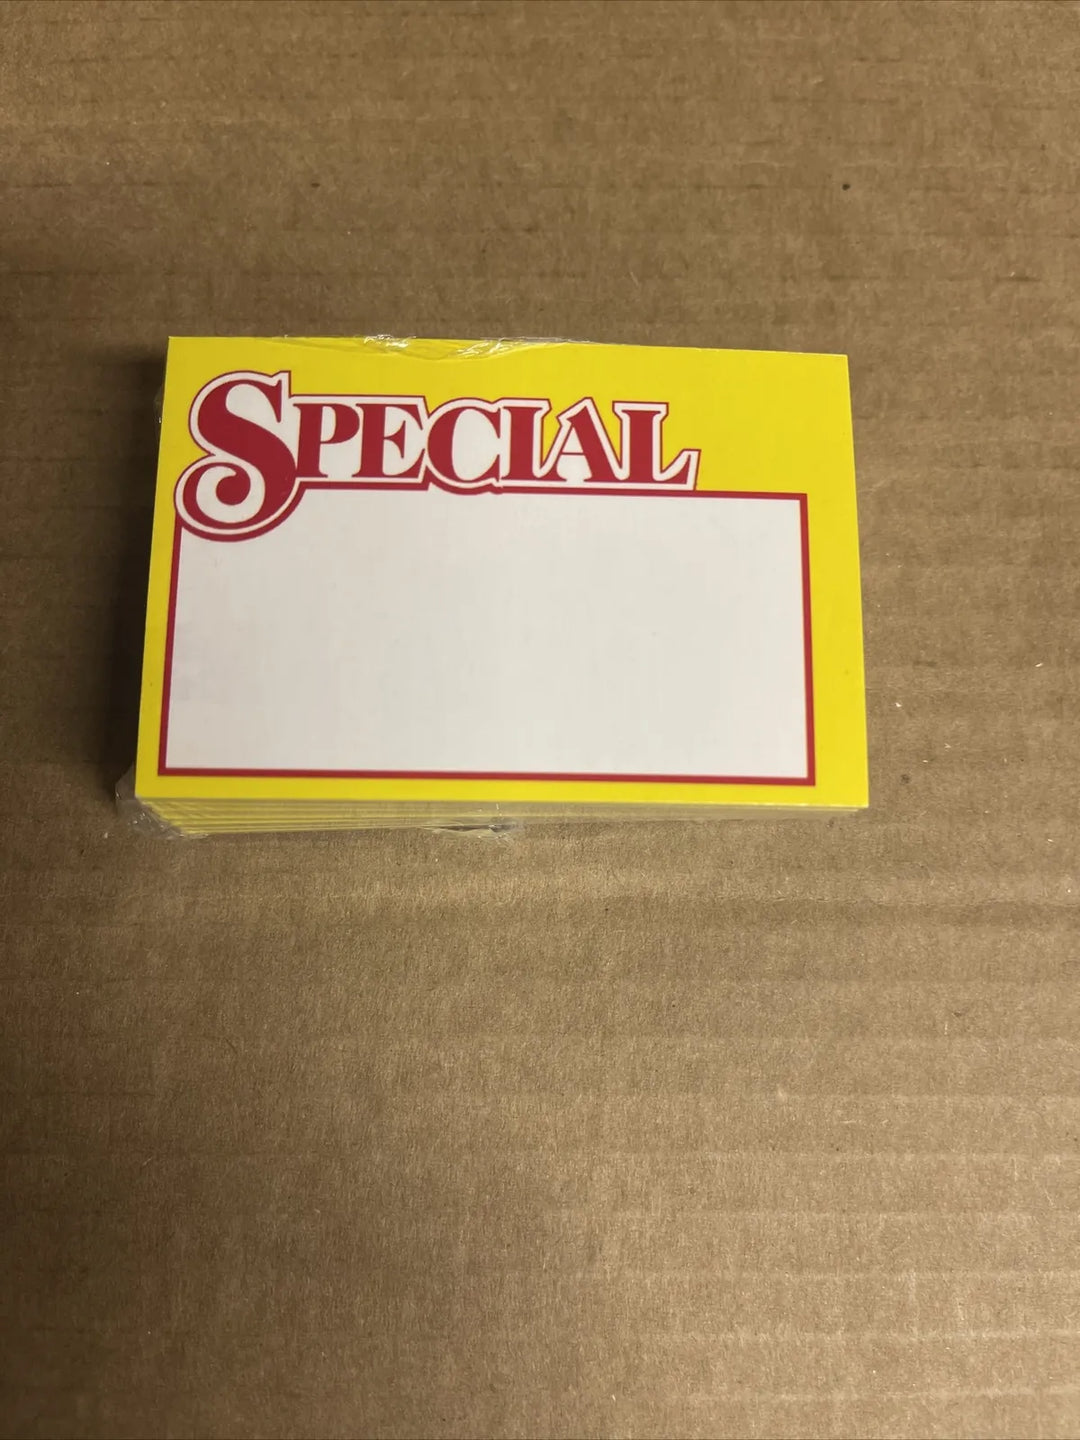 Special Large Retail Price Signs   100 per Box